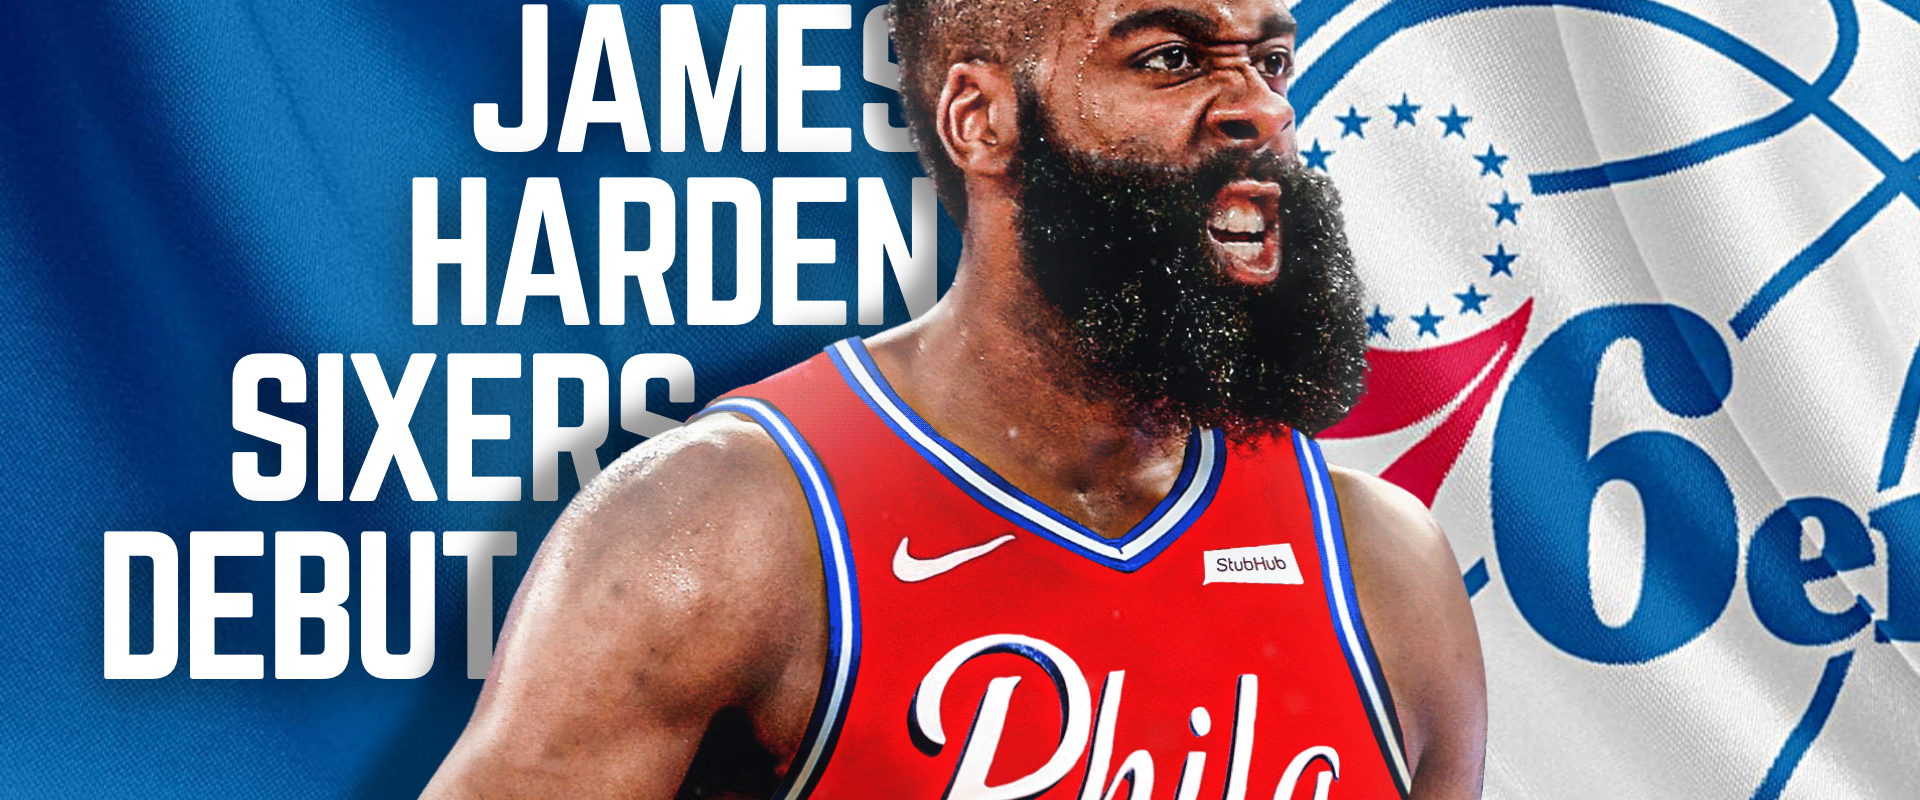 1920x1080_James Harden Could Make His Sixers Debut on February 15 Against Boston-Ron